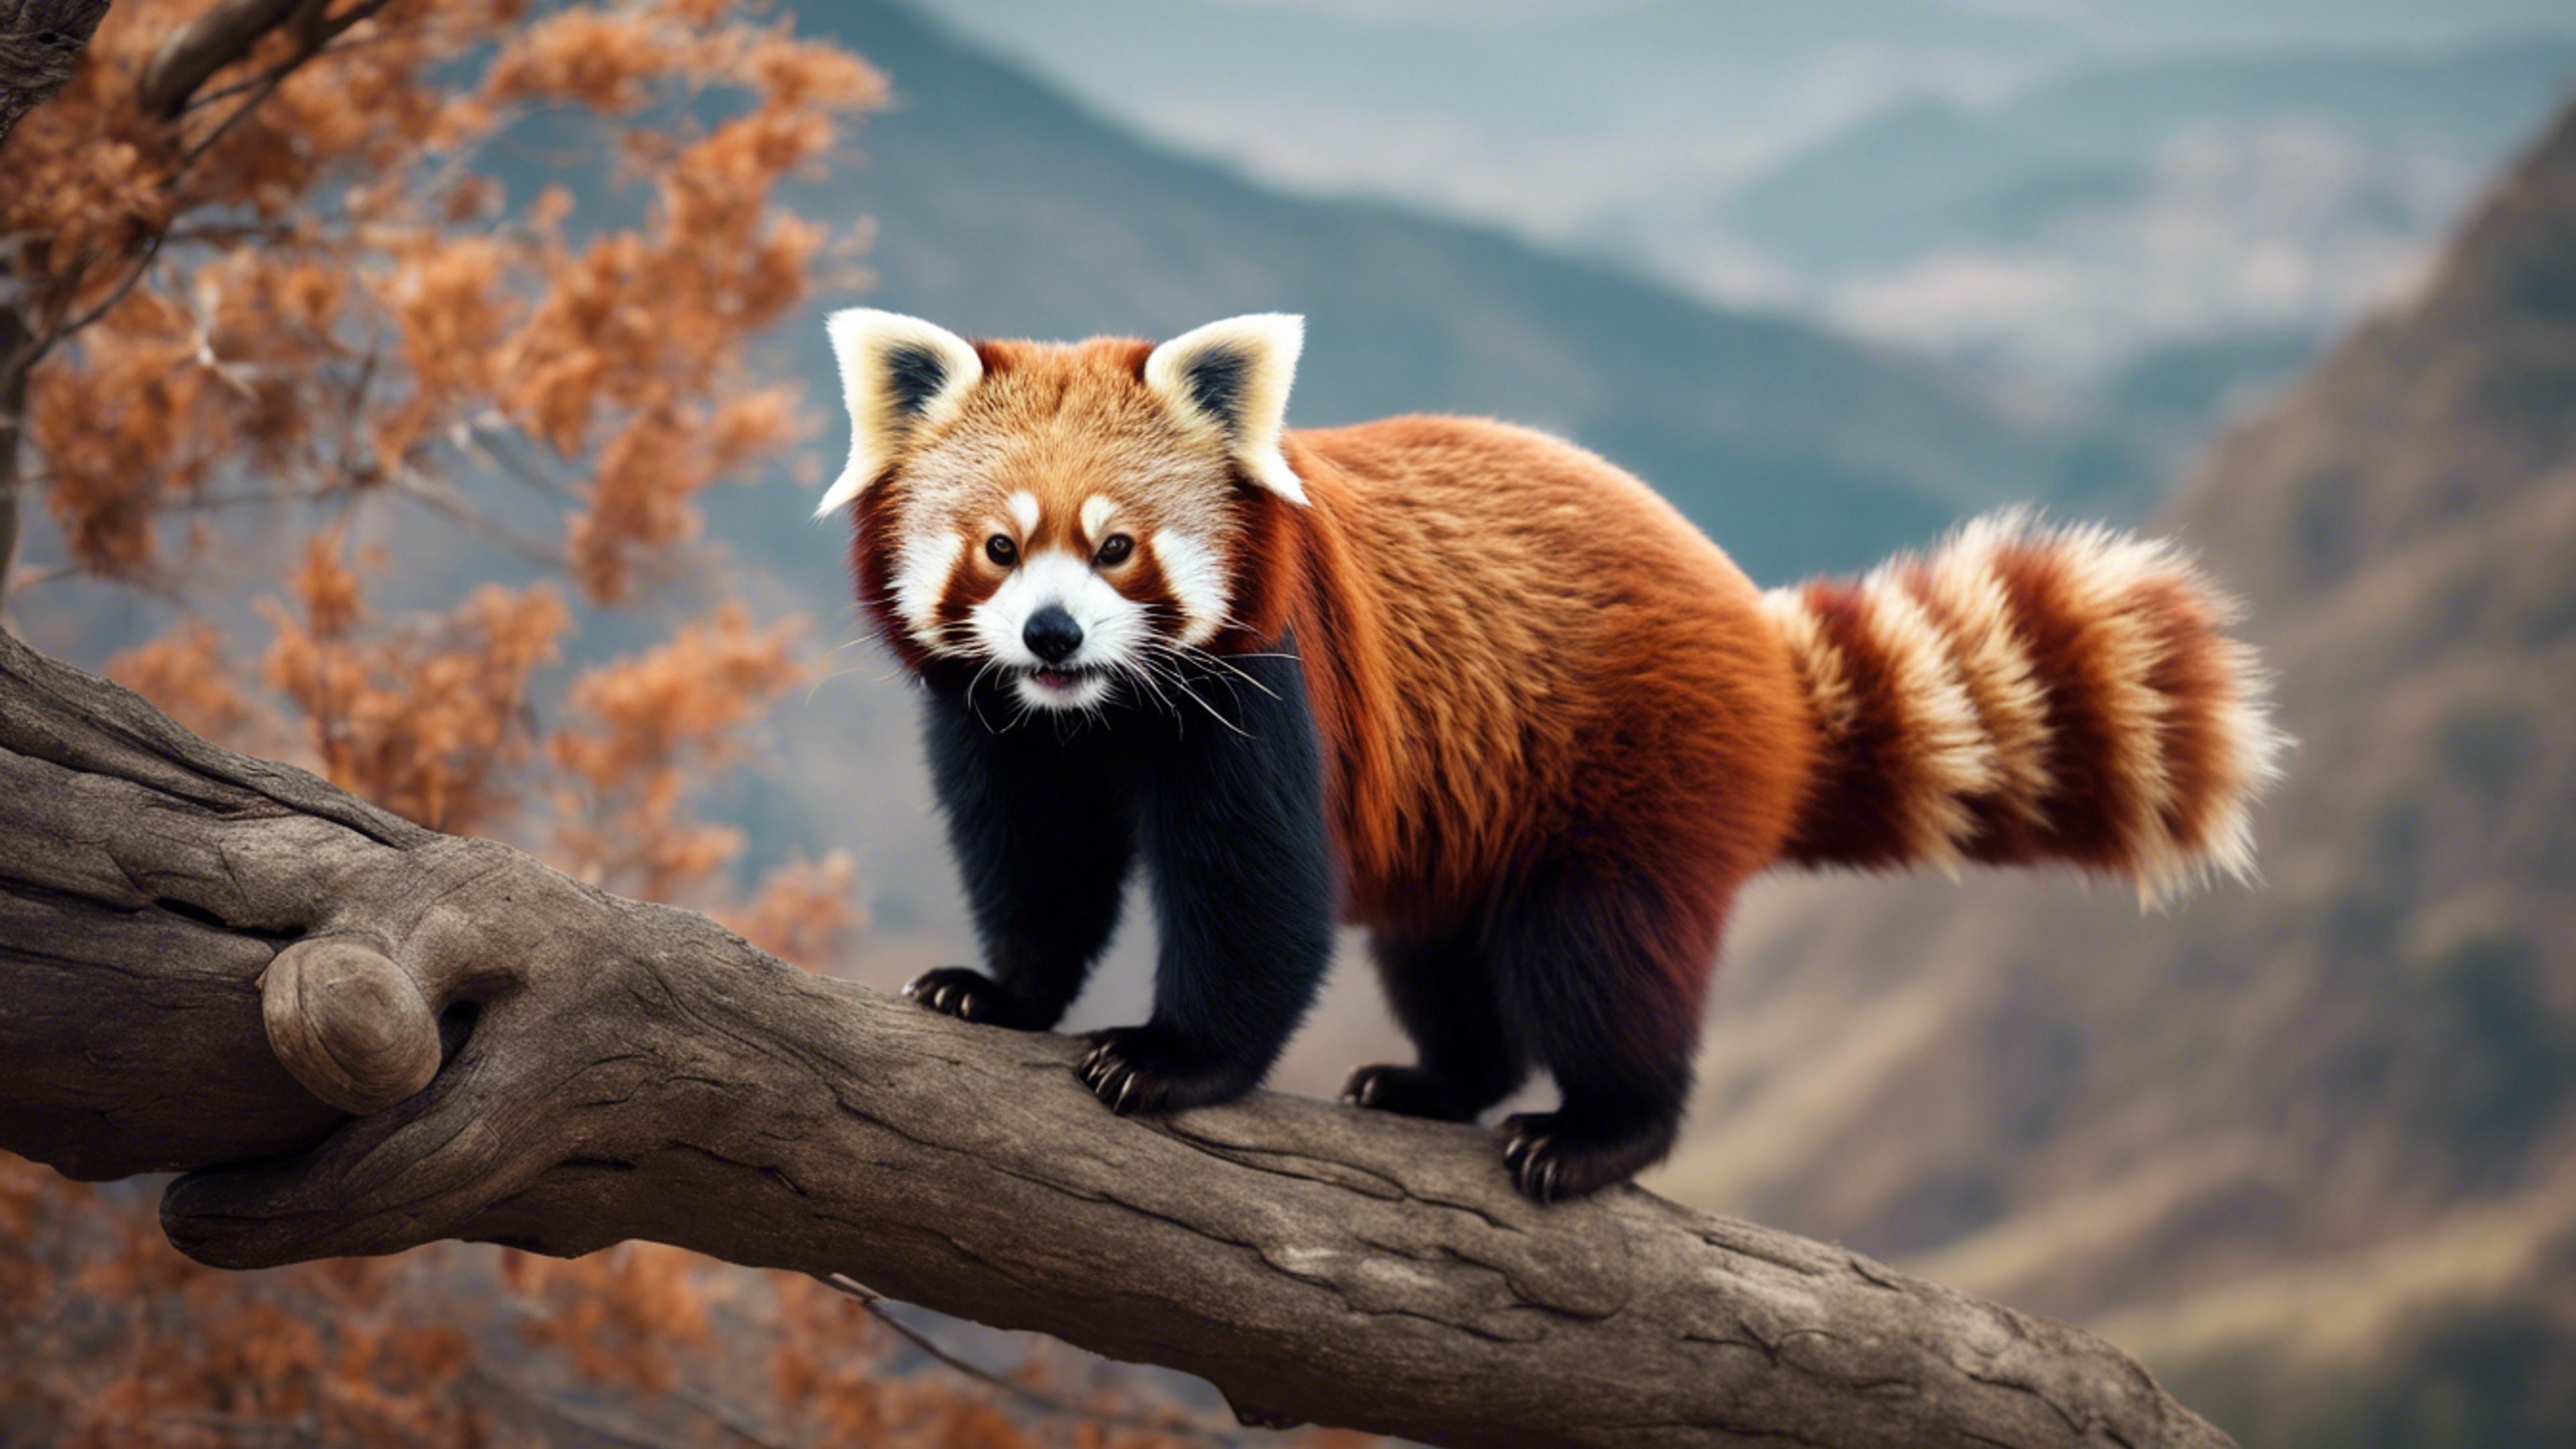 A strong, adult red panda confidently standing on a branch, mountains in the backdrop.壁紙[4b97538c6e5a45e29bab]